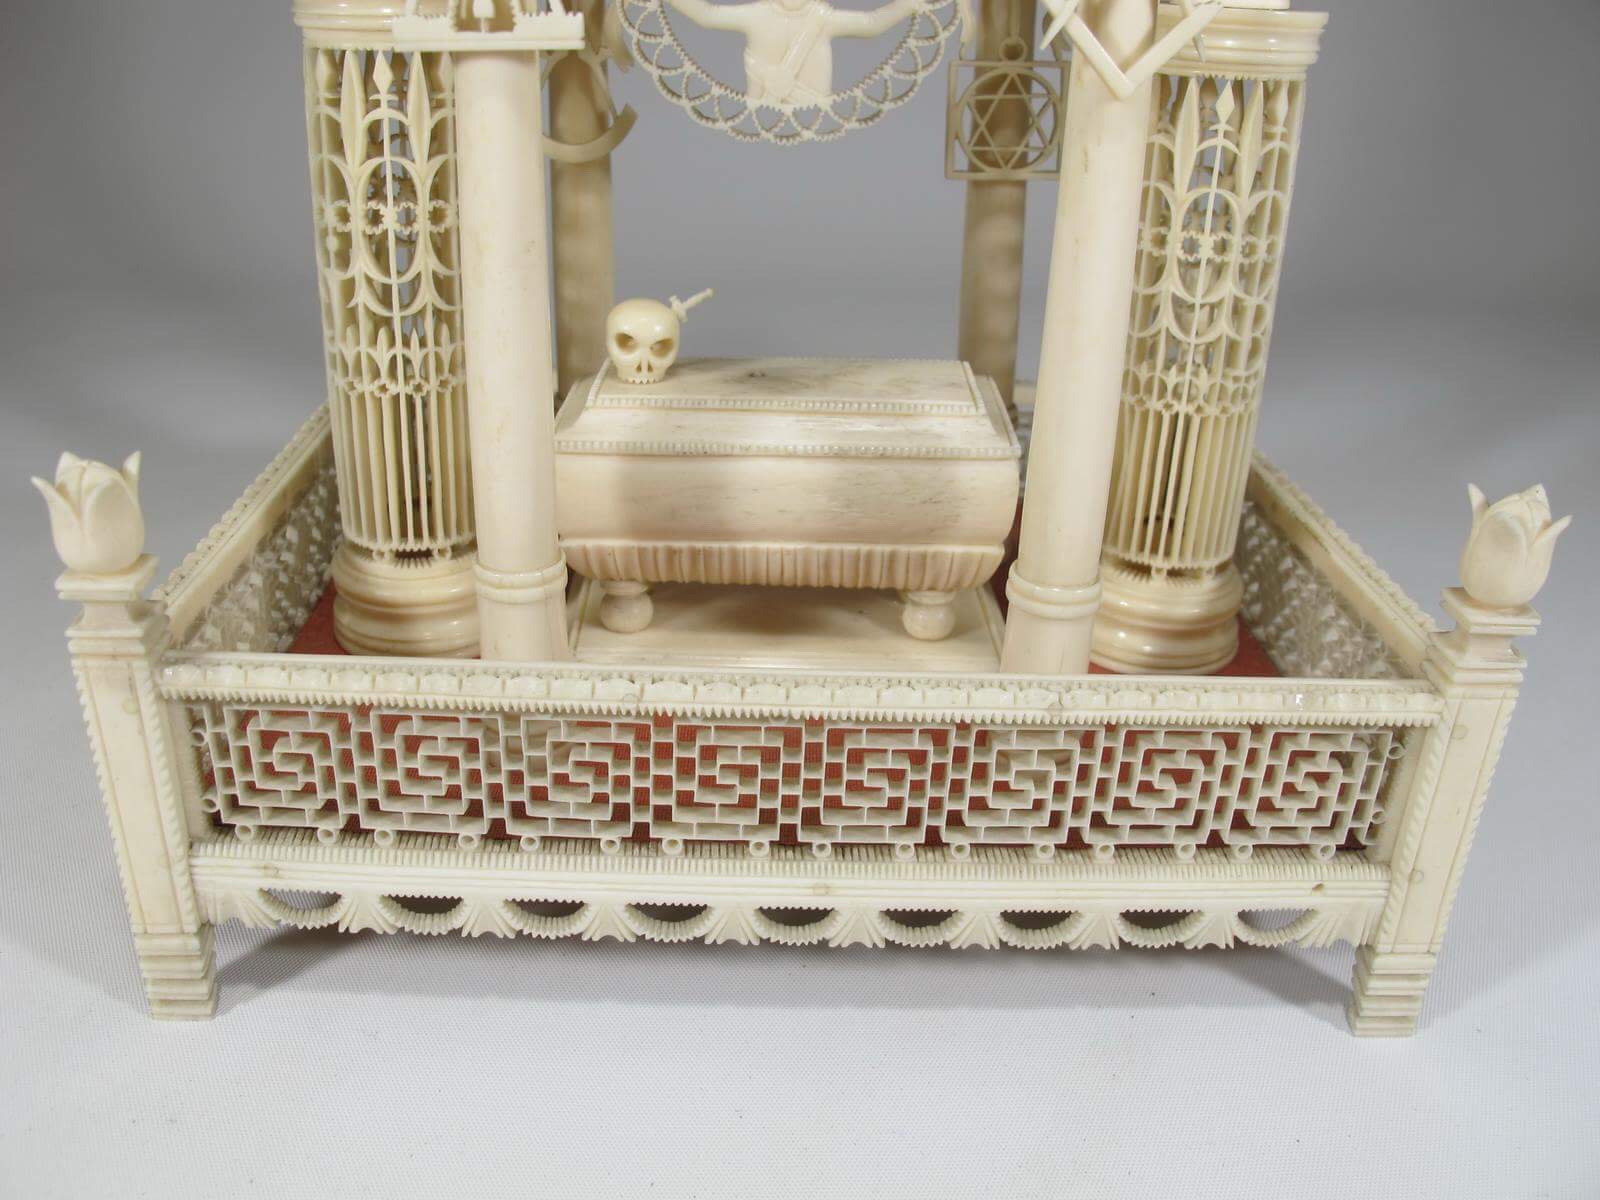 Masonic Altar Hand Carved in Ivory and Bone